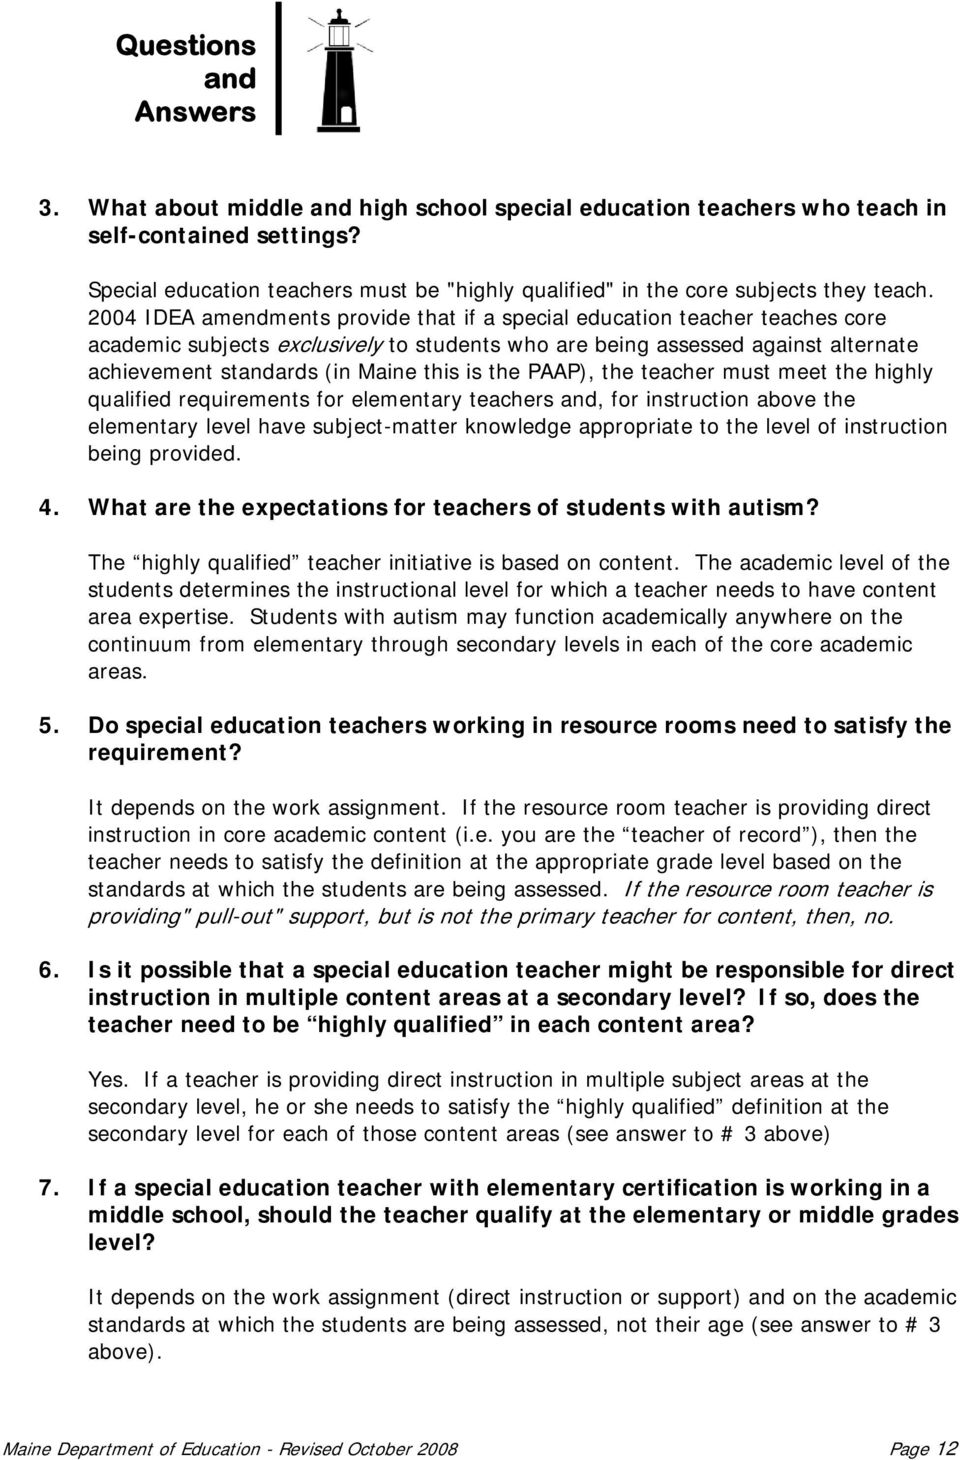 the PAAP), the teacher must meet the highly qualified requirements for elementary teachers, for instruction above the elementary level have subject-matter knowledge appropriate to the level of